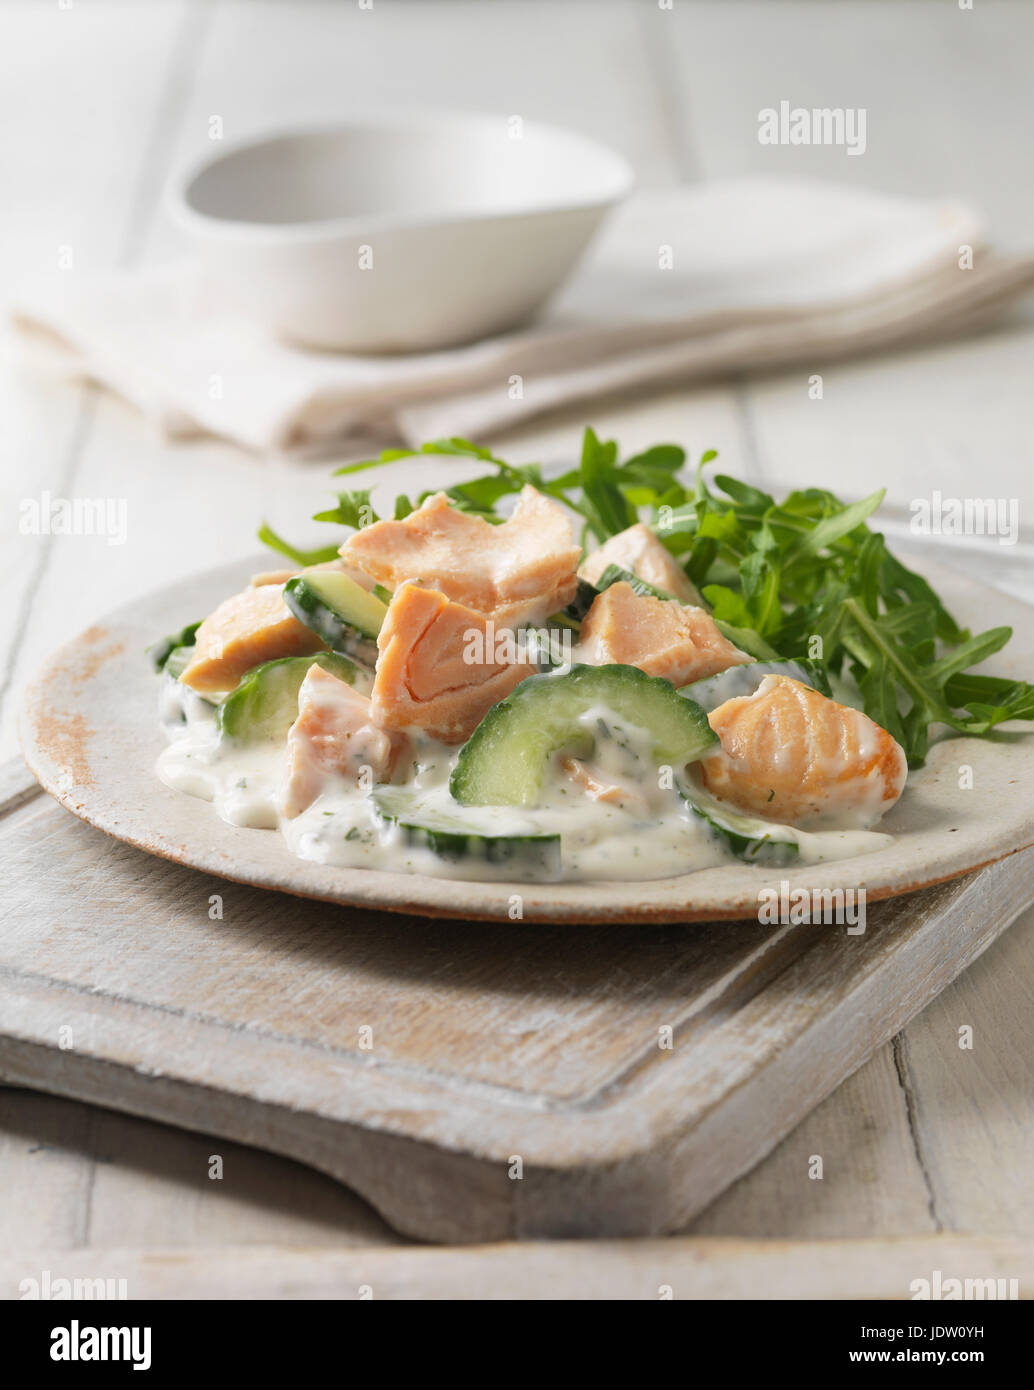 Plate of salmon with dill mayonnaise Stock Photo